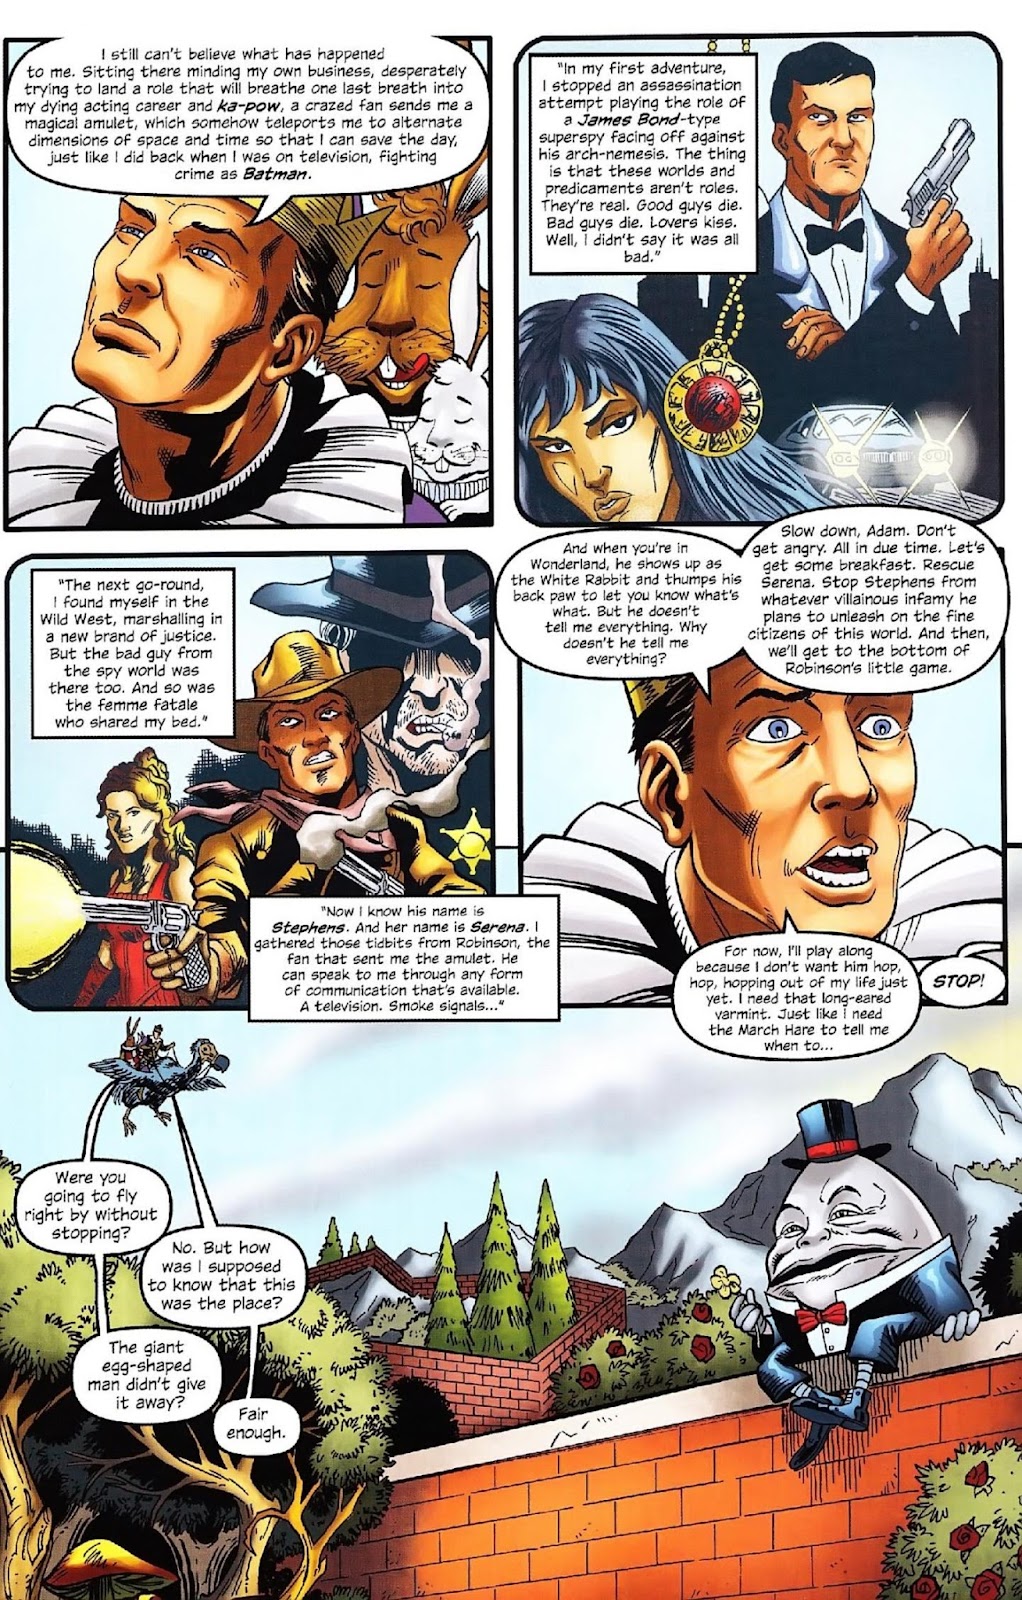 The Mis-Adventures of Adam West (2012) issue 2 - Page 5